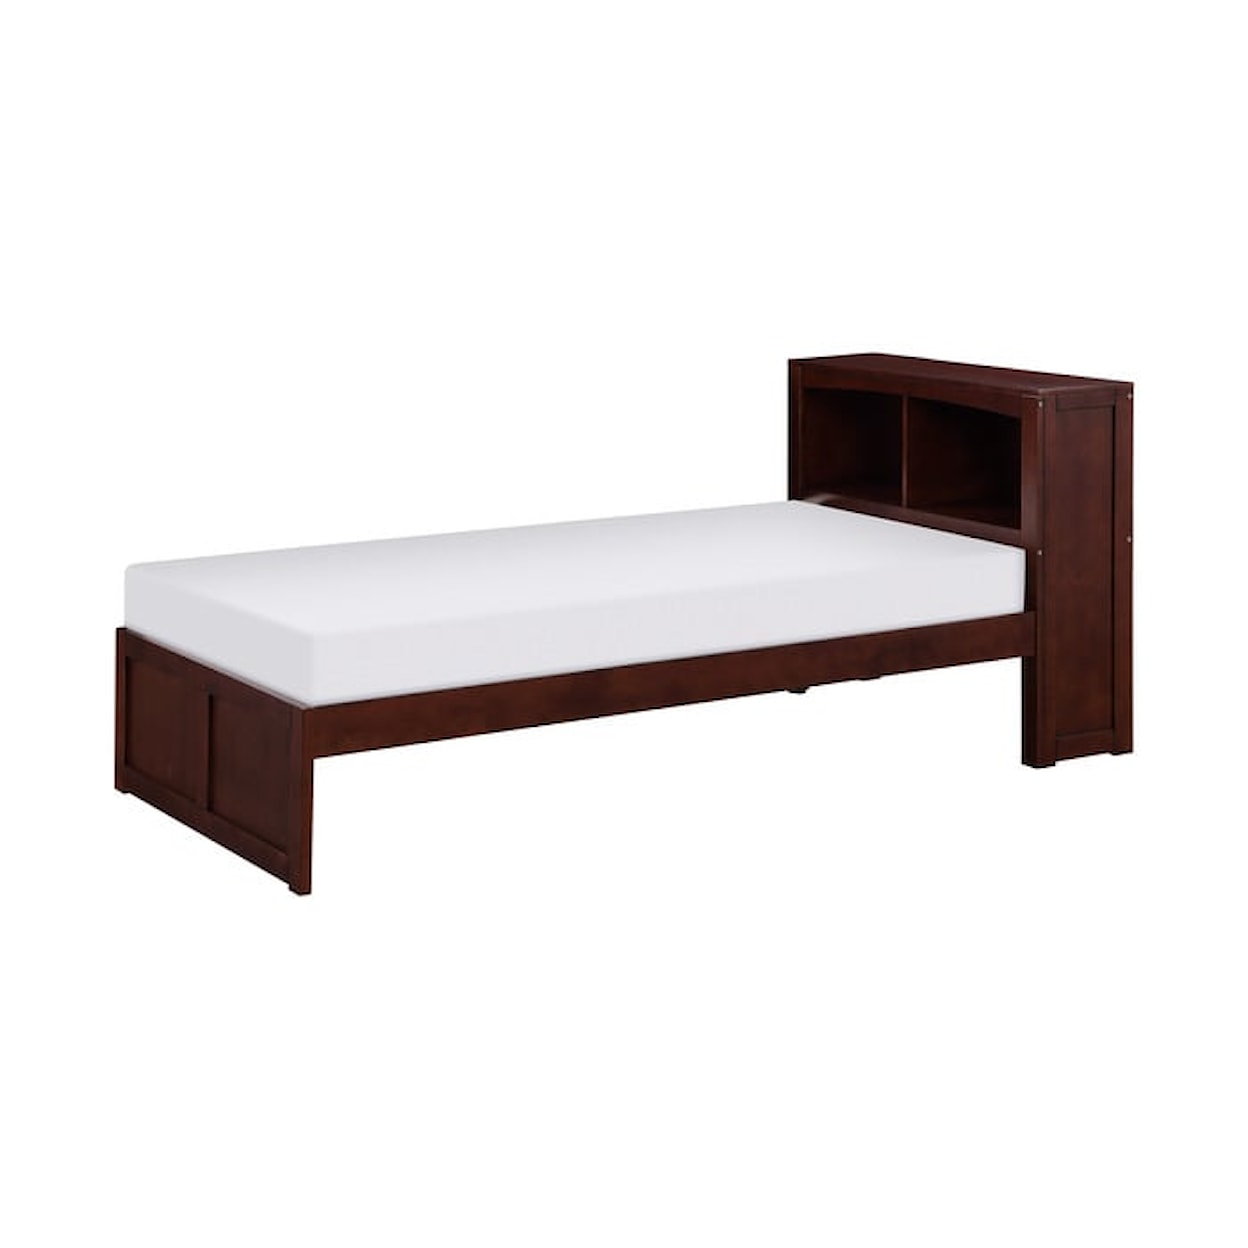 Homelegance Rowe Twin Bookcase Bed